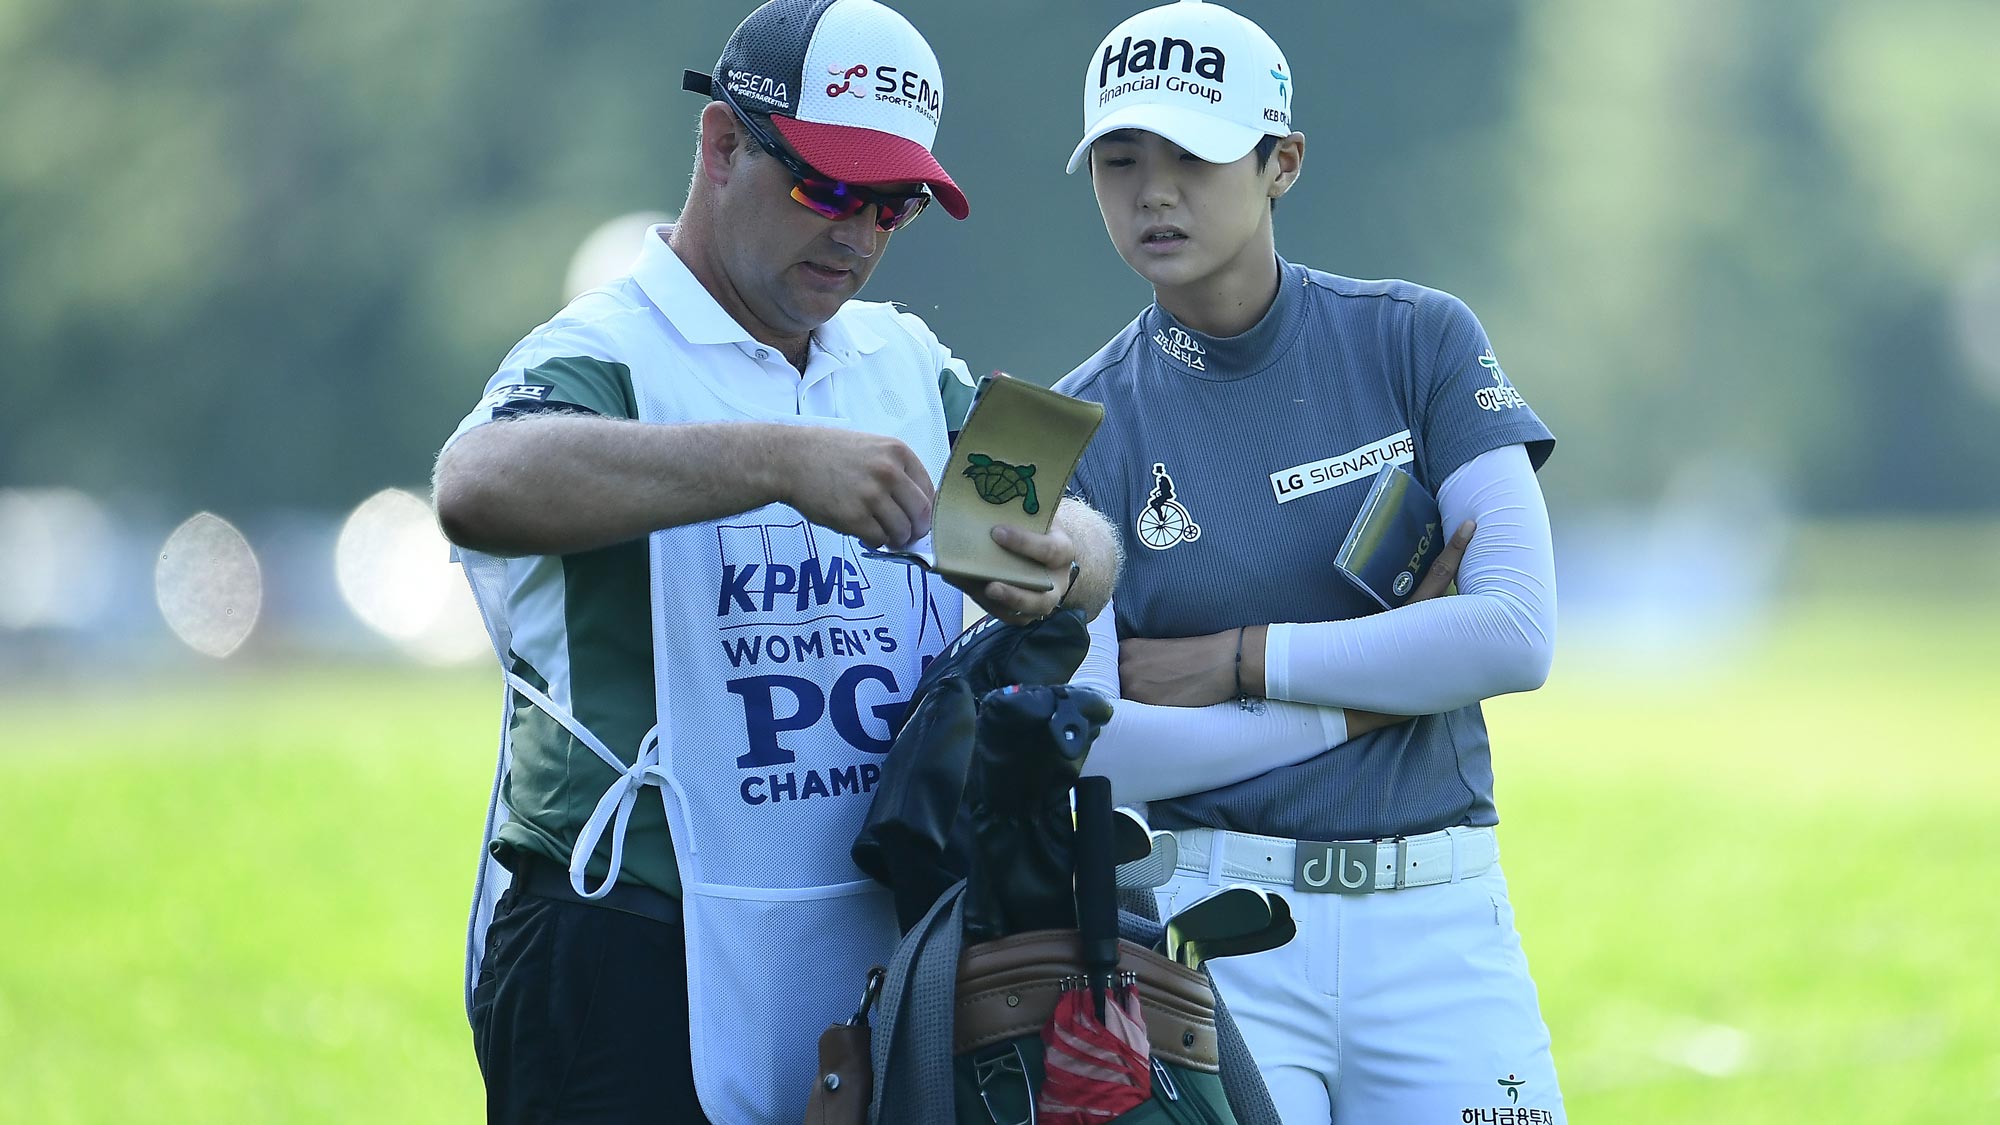 Sung Hyun Park of Korea speaks with her caddie on the 10th hole during the second round of the KPMG Women's PGA Championship